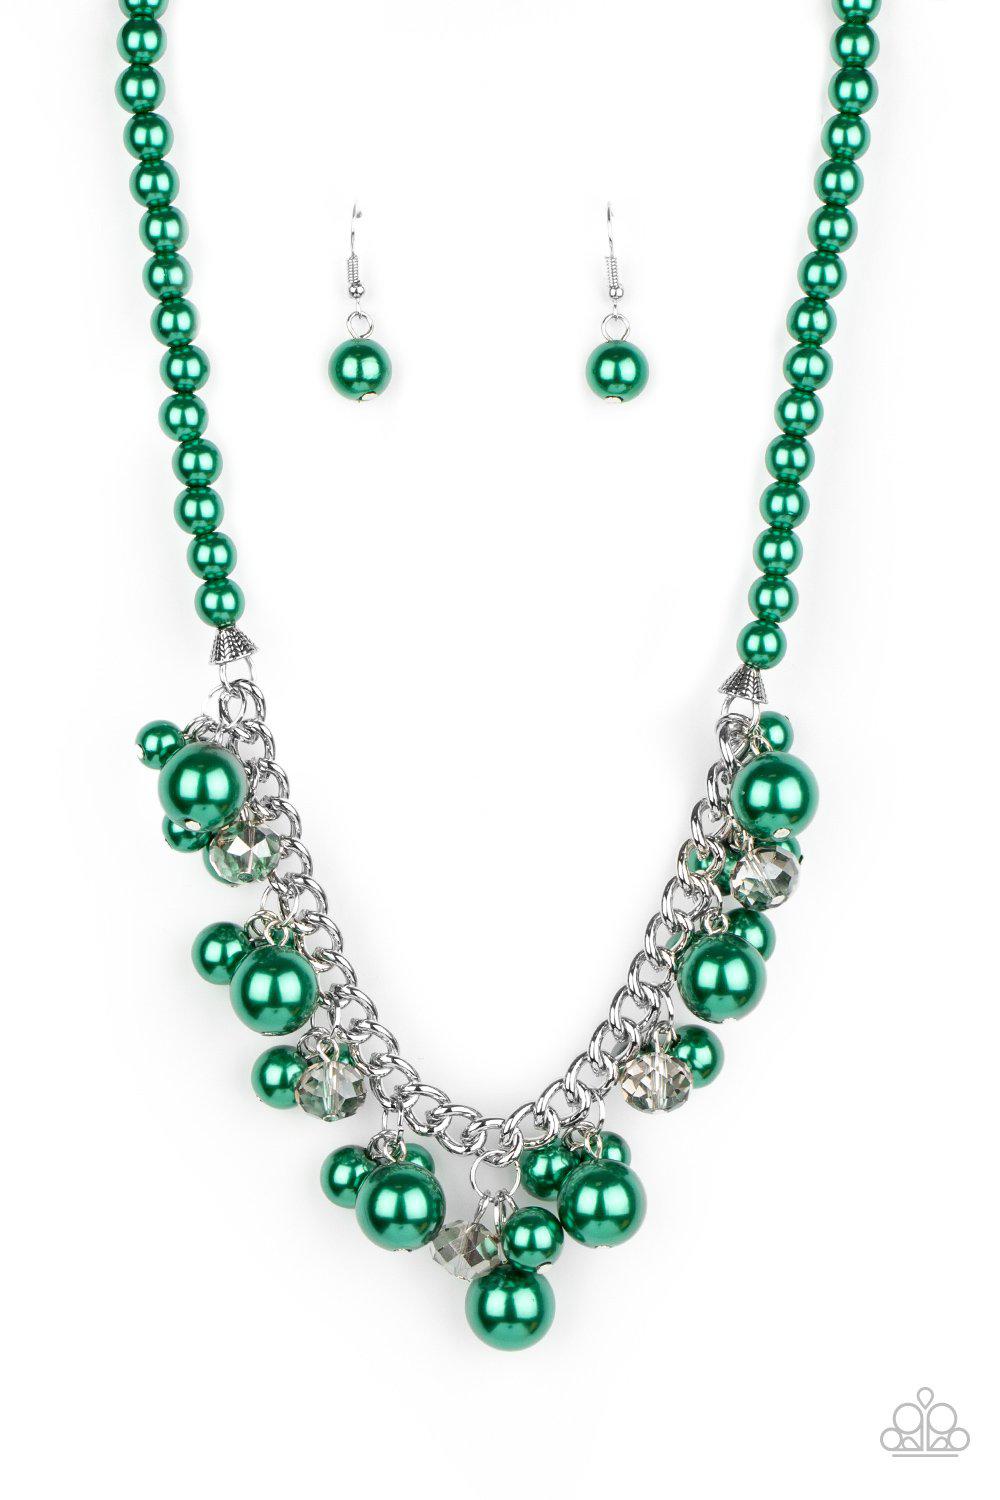 Prim and POLISHED Green Pearl Necklace - Paparazzi Accessories - lightbox -CarasShop.com - $5 Jewelry by Cara Jewels